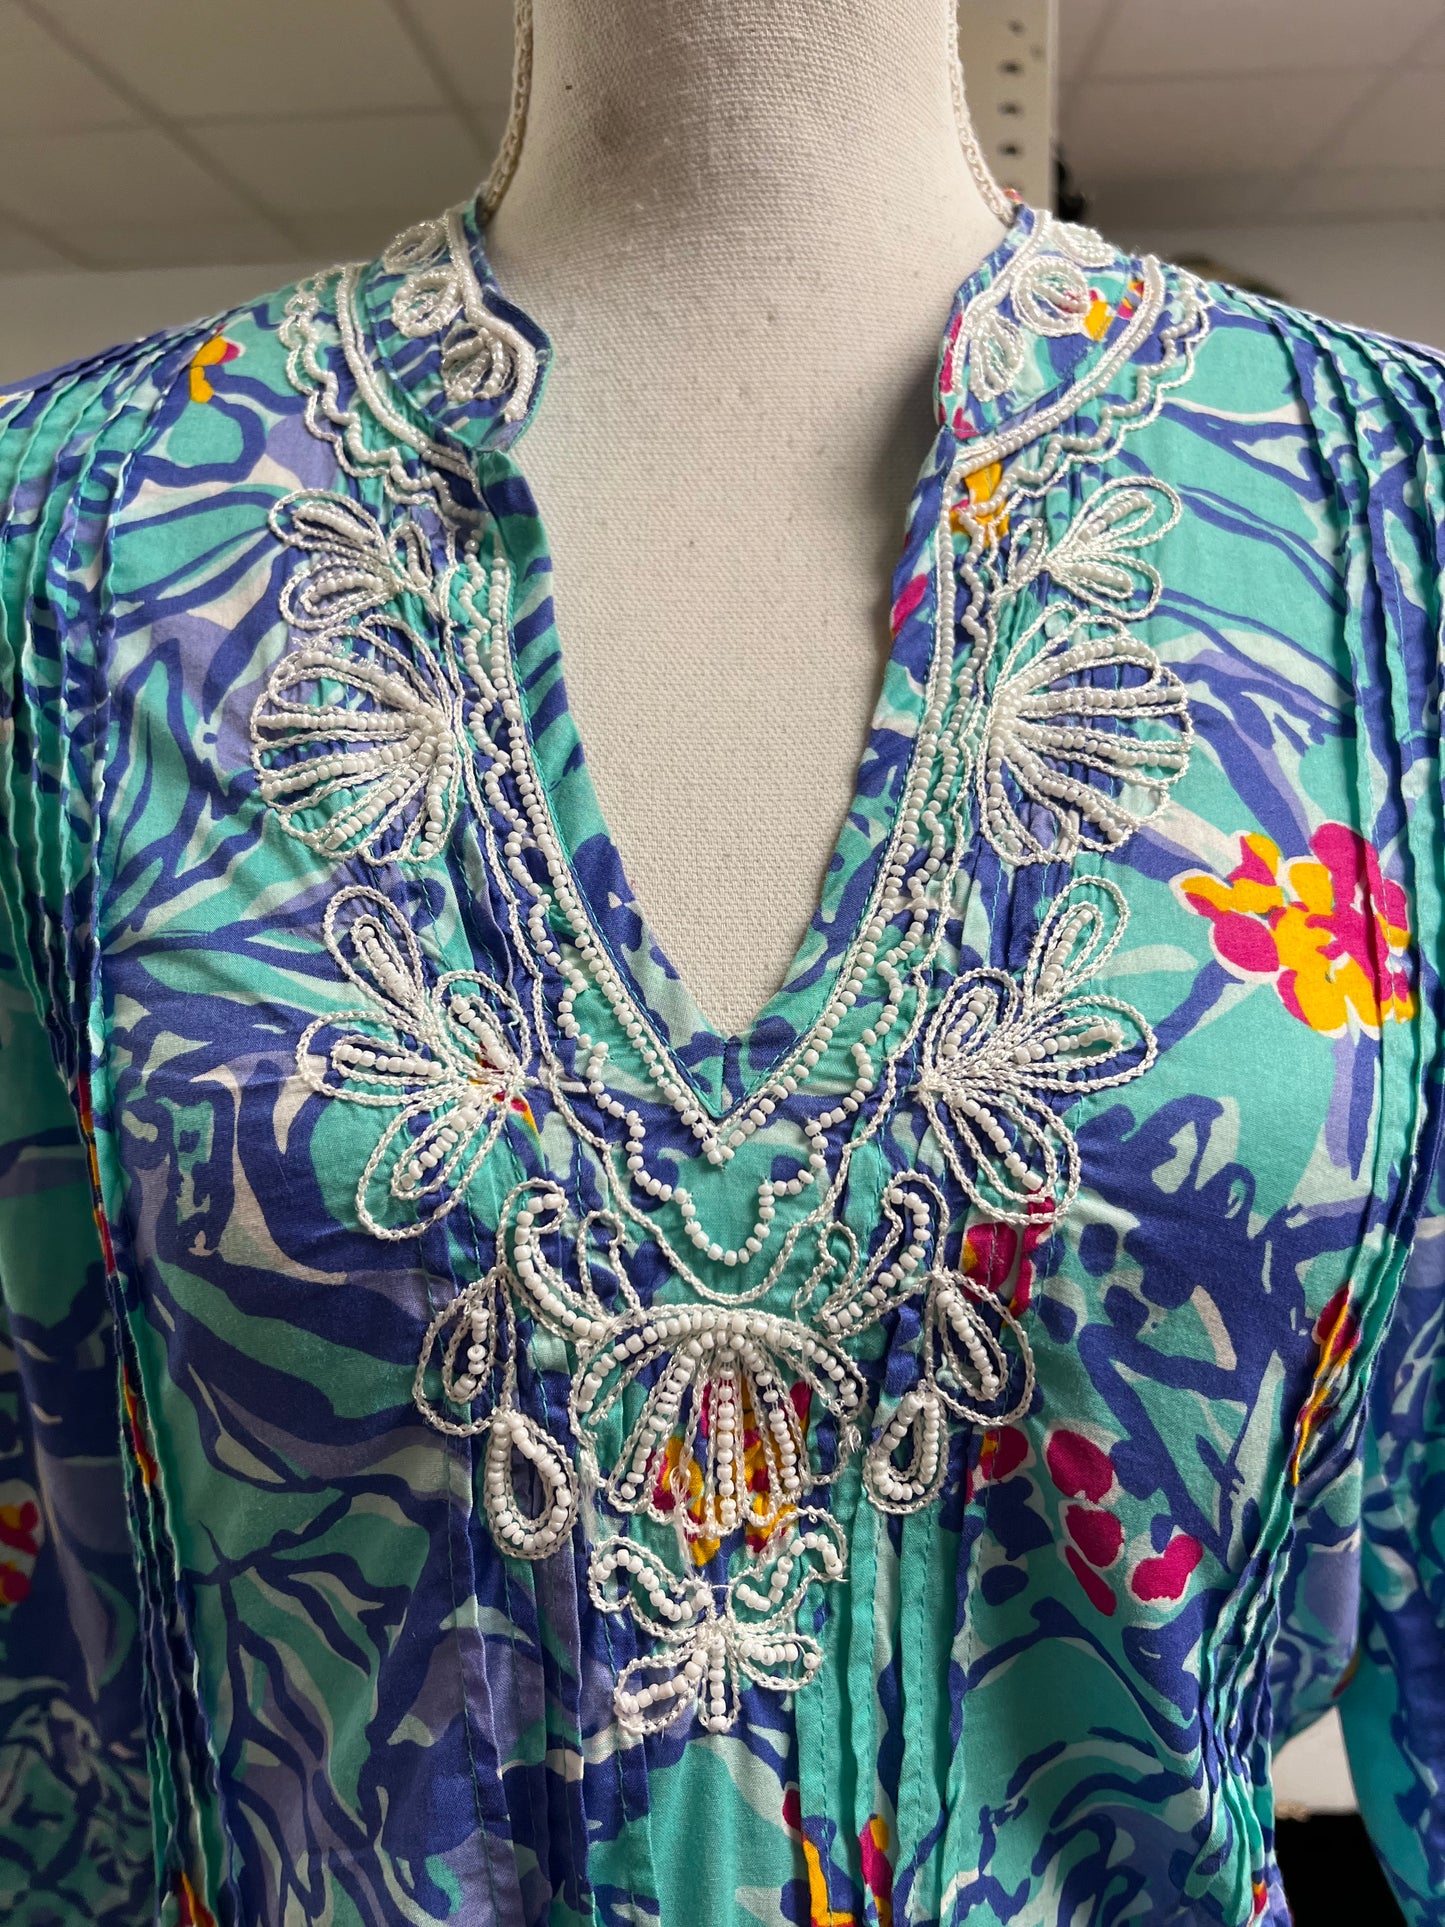 Lilly Pulitzer Women's Tunic Top. Size Medium. Mulit color